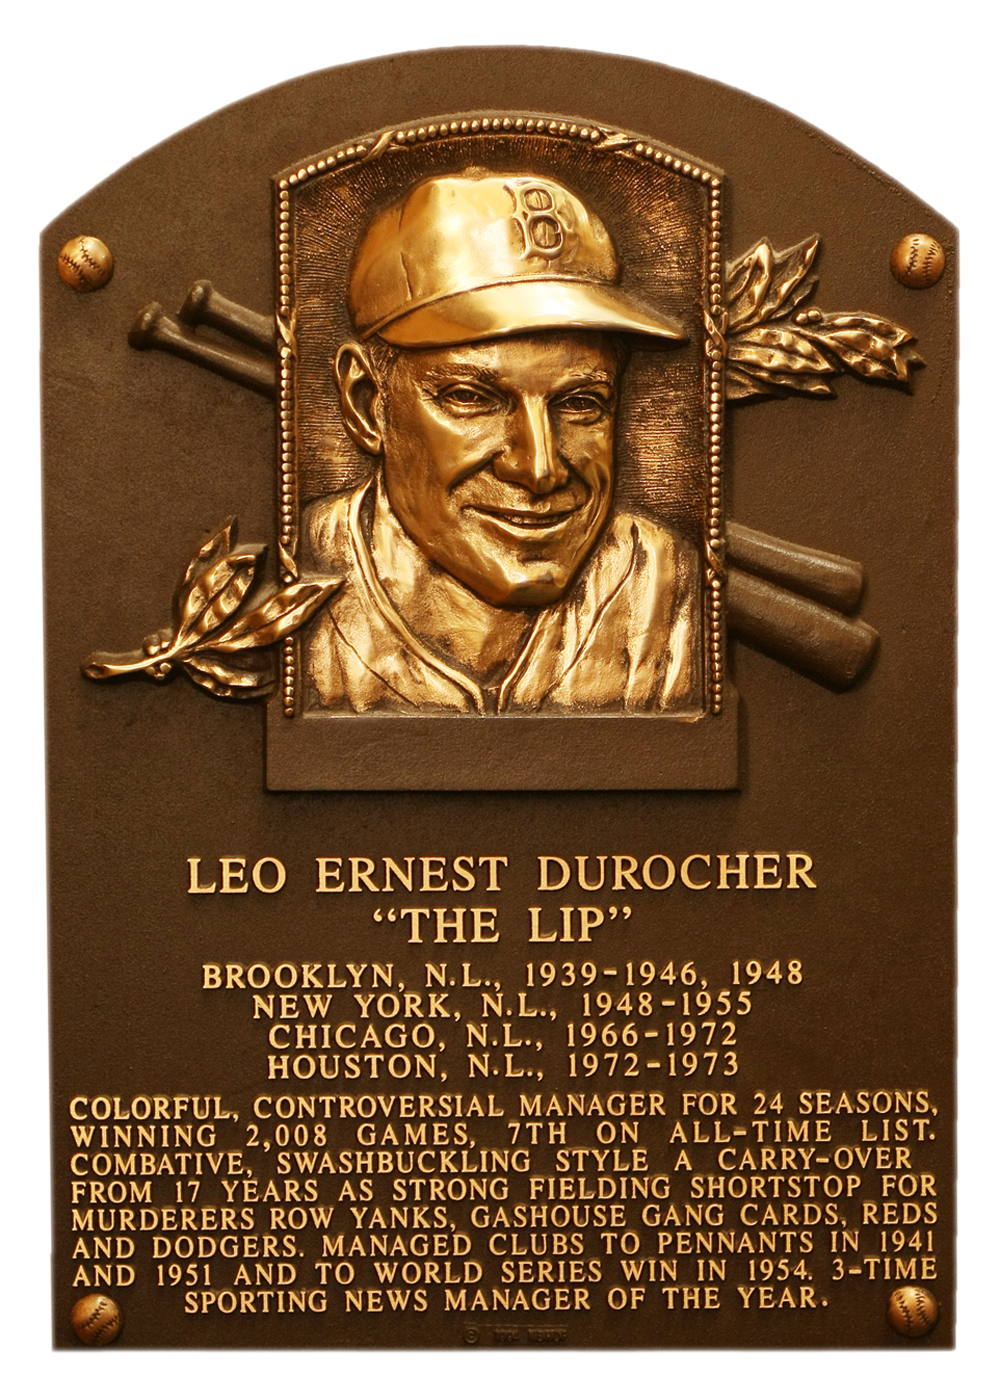 Leo Durocher Hall of Fame plaque